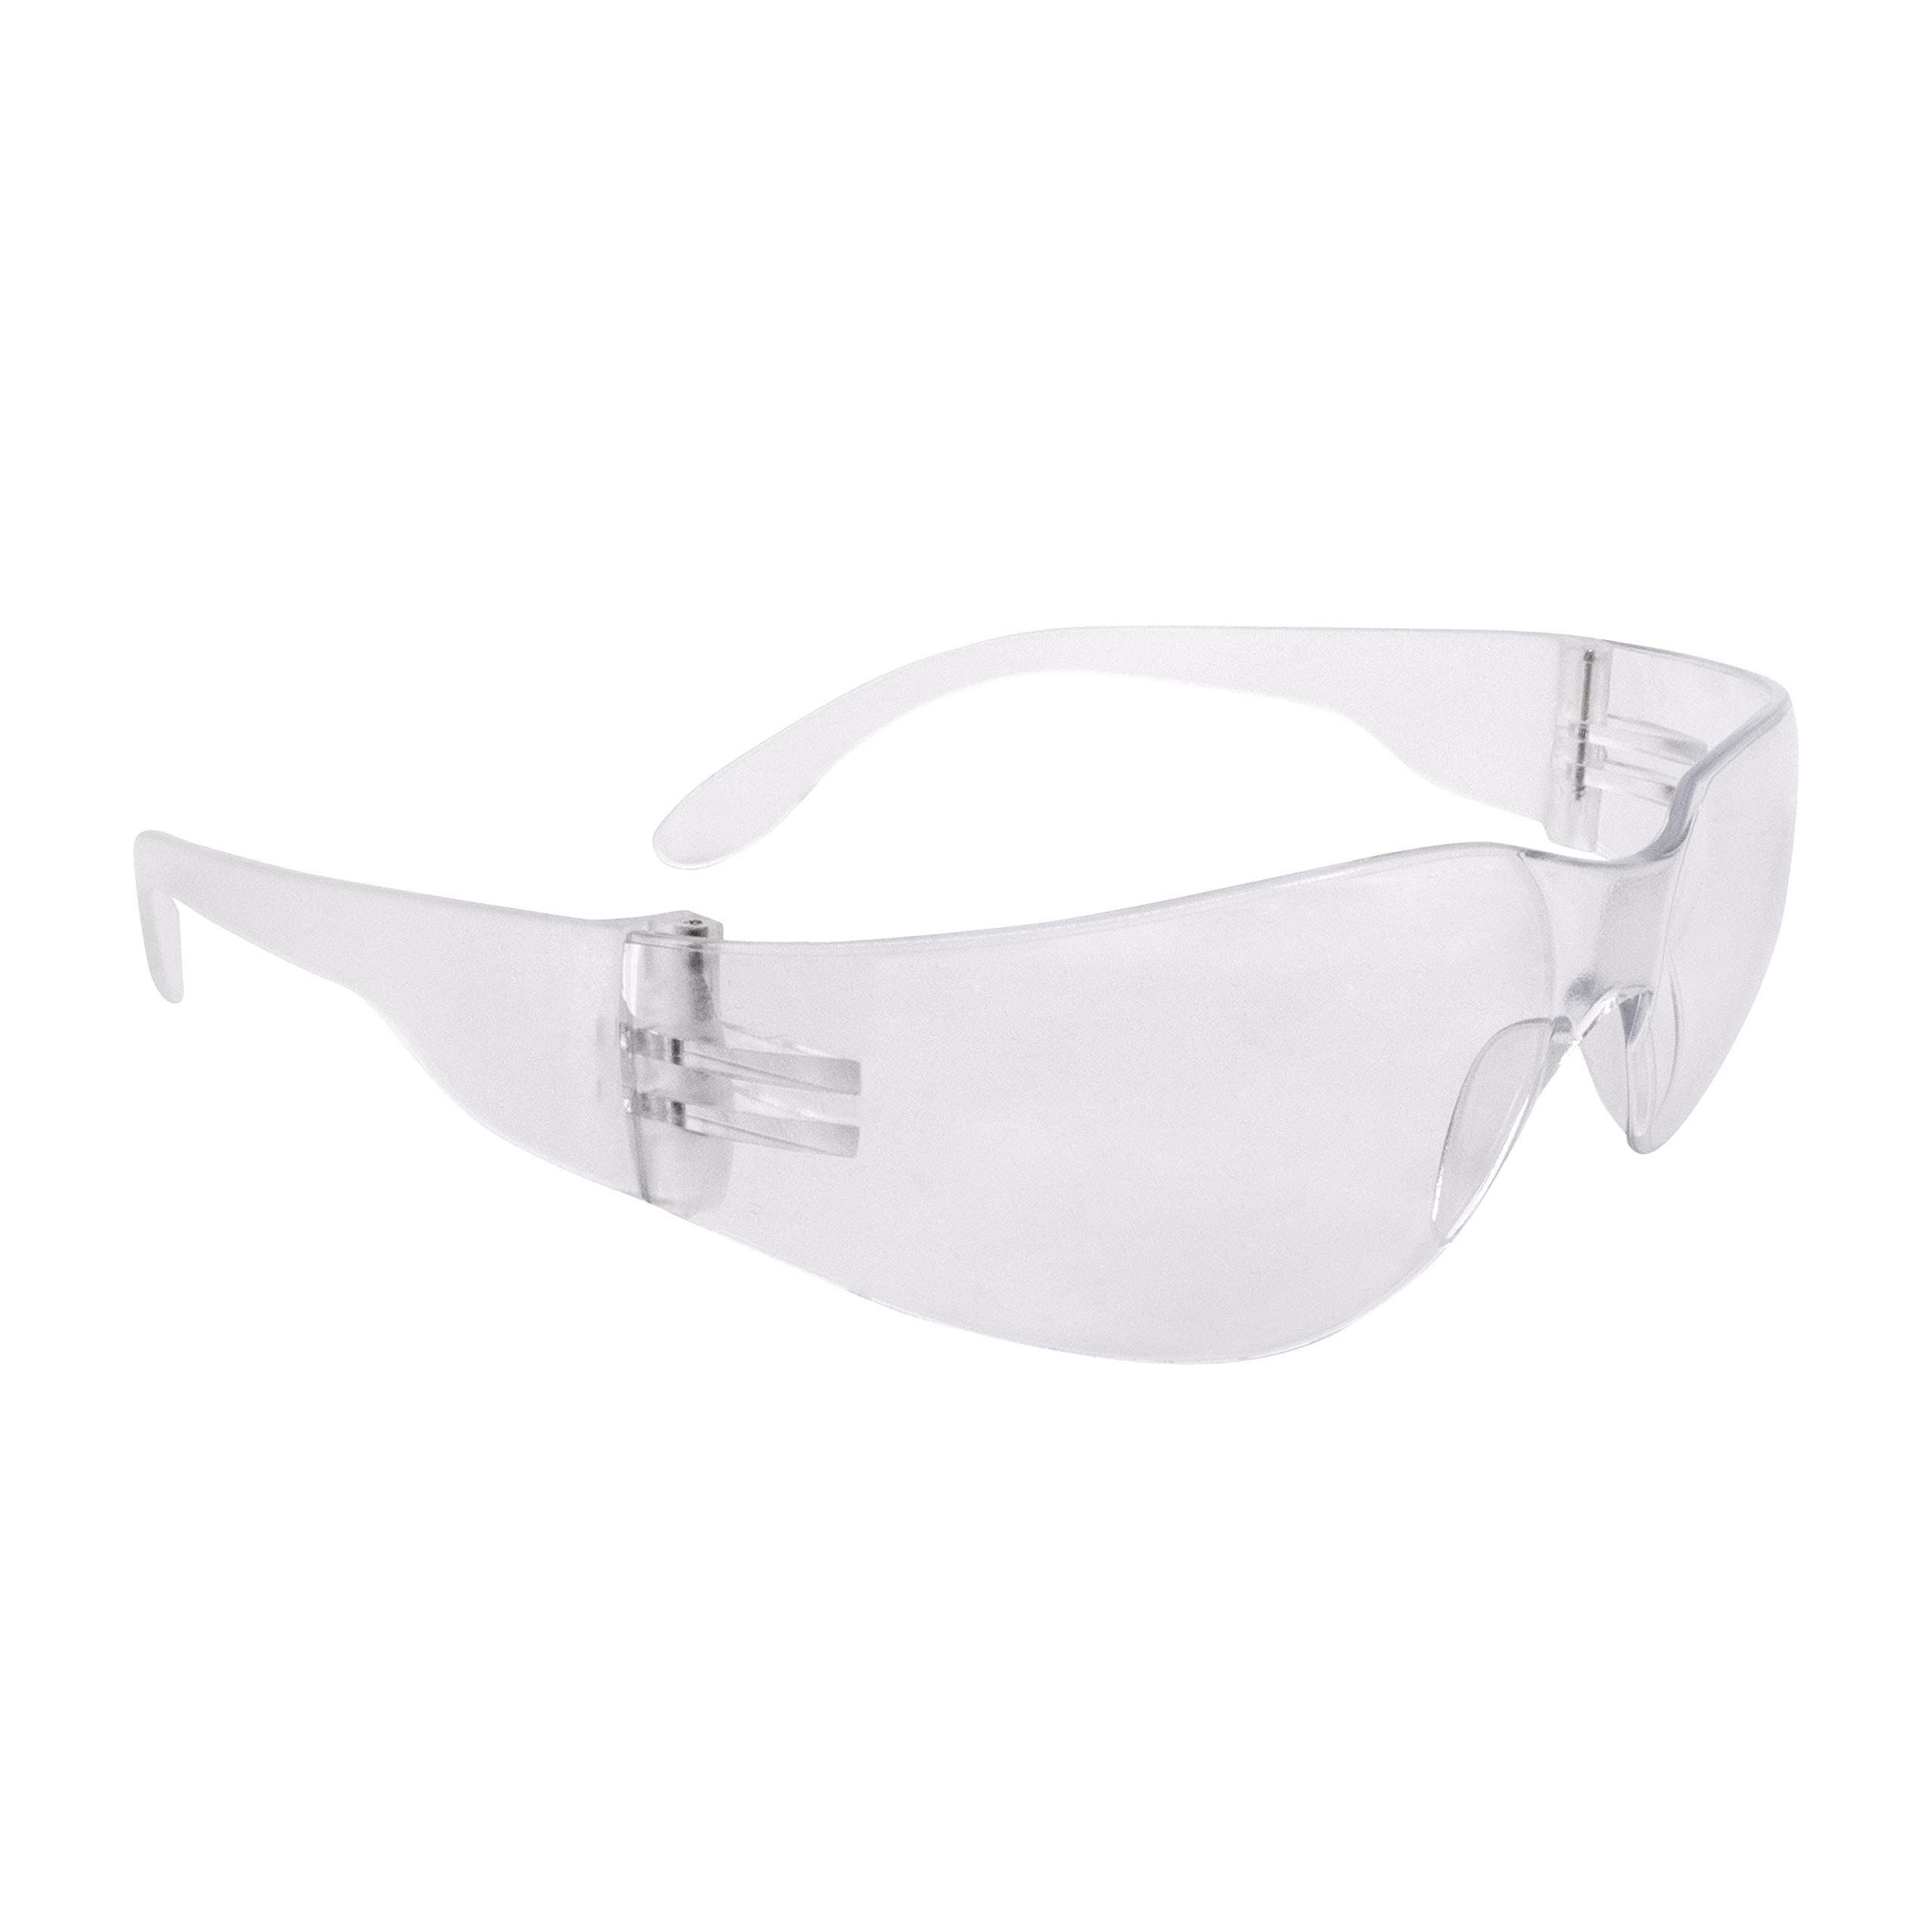 Radians Clear Safety Glasses, Scratch-Resistant, Wraparound, One Size